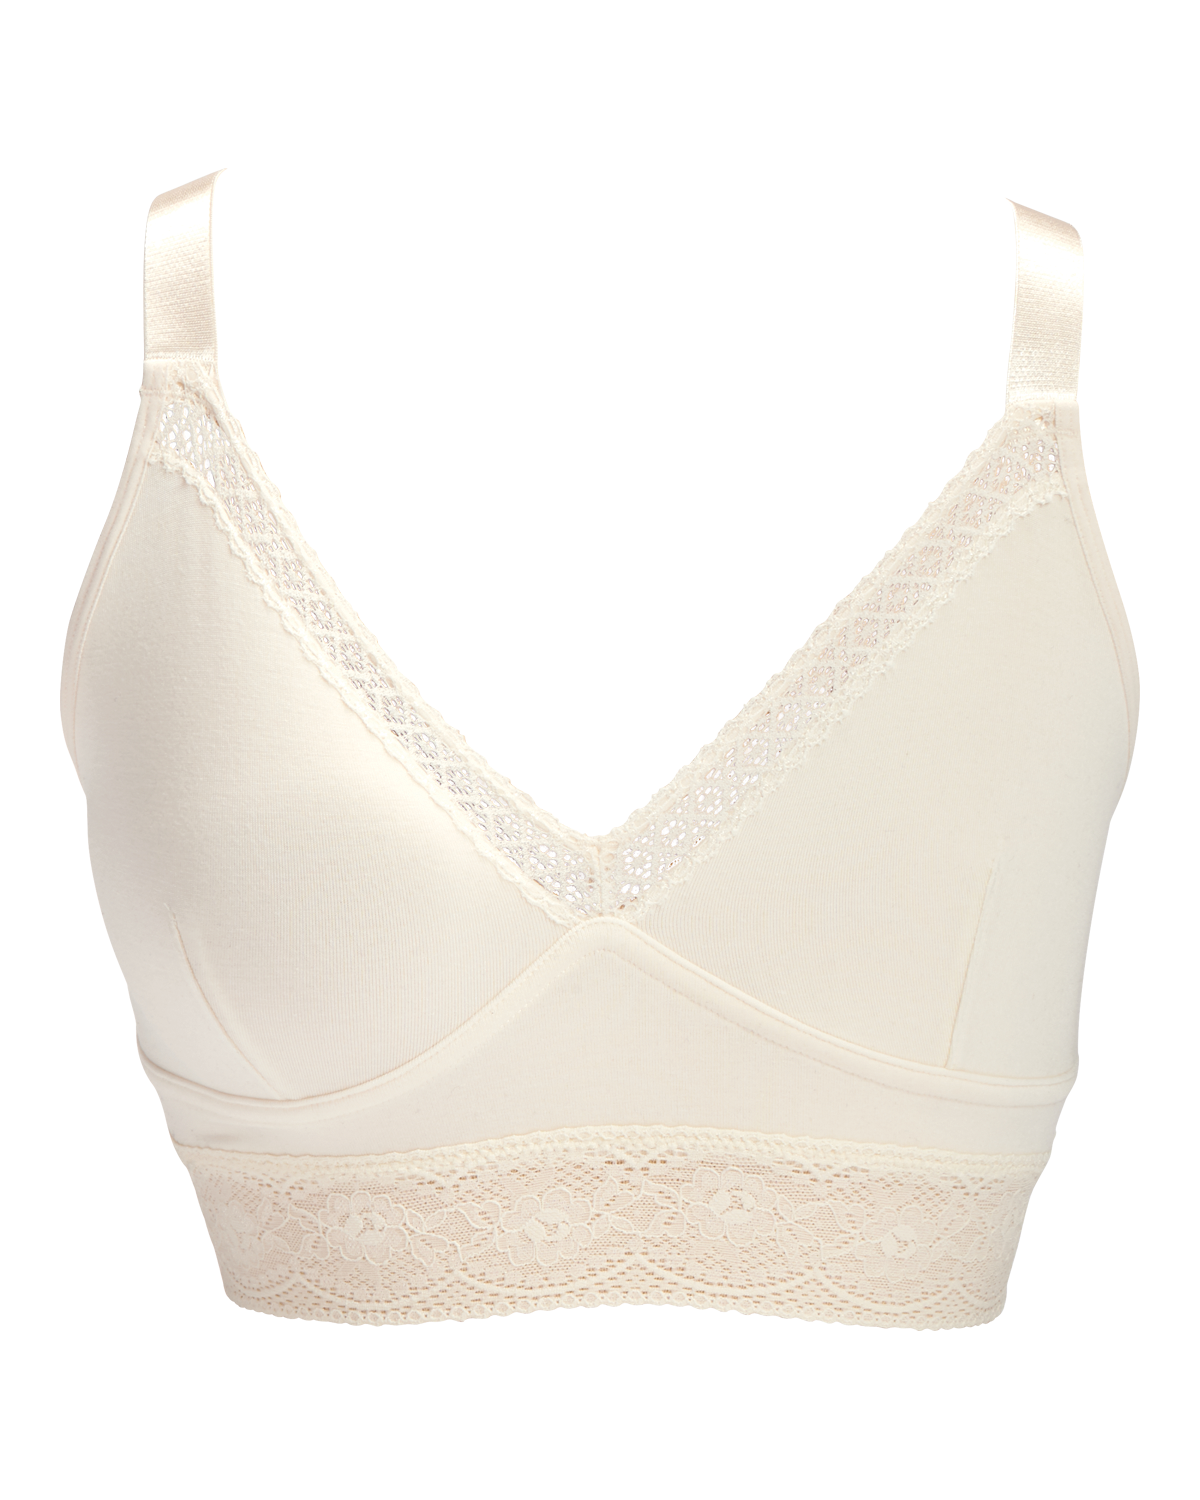 Delilah Wireless Mastectomy Bralette AO-019 – The Full Cup